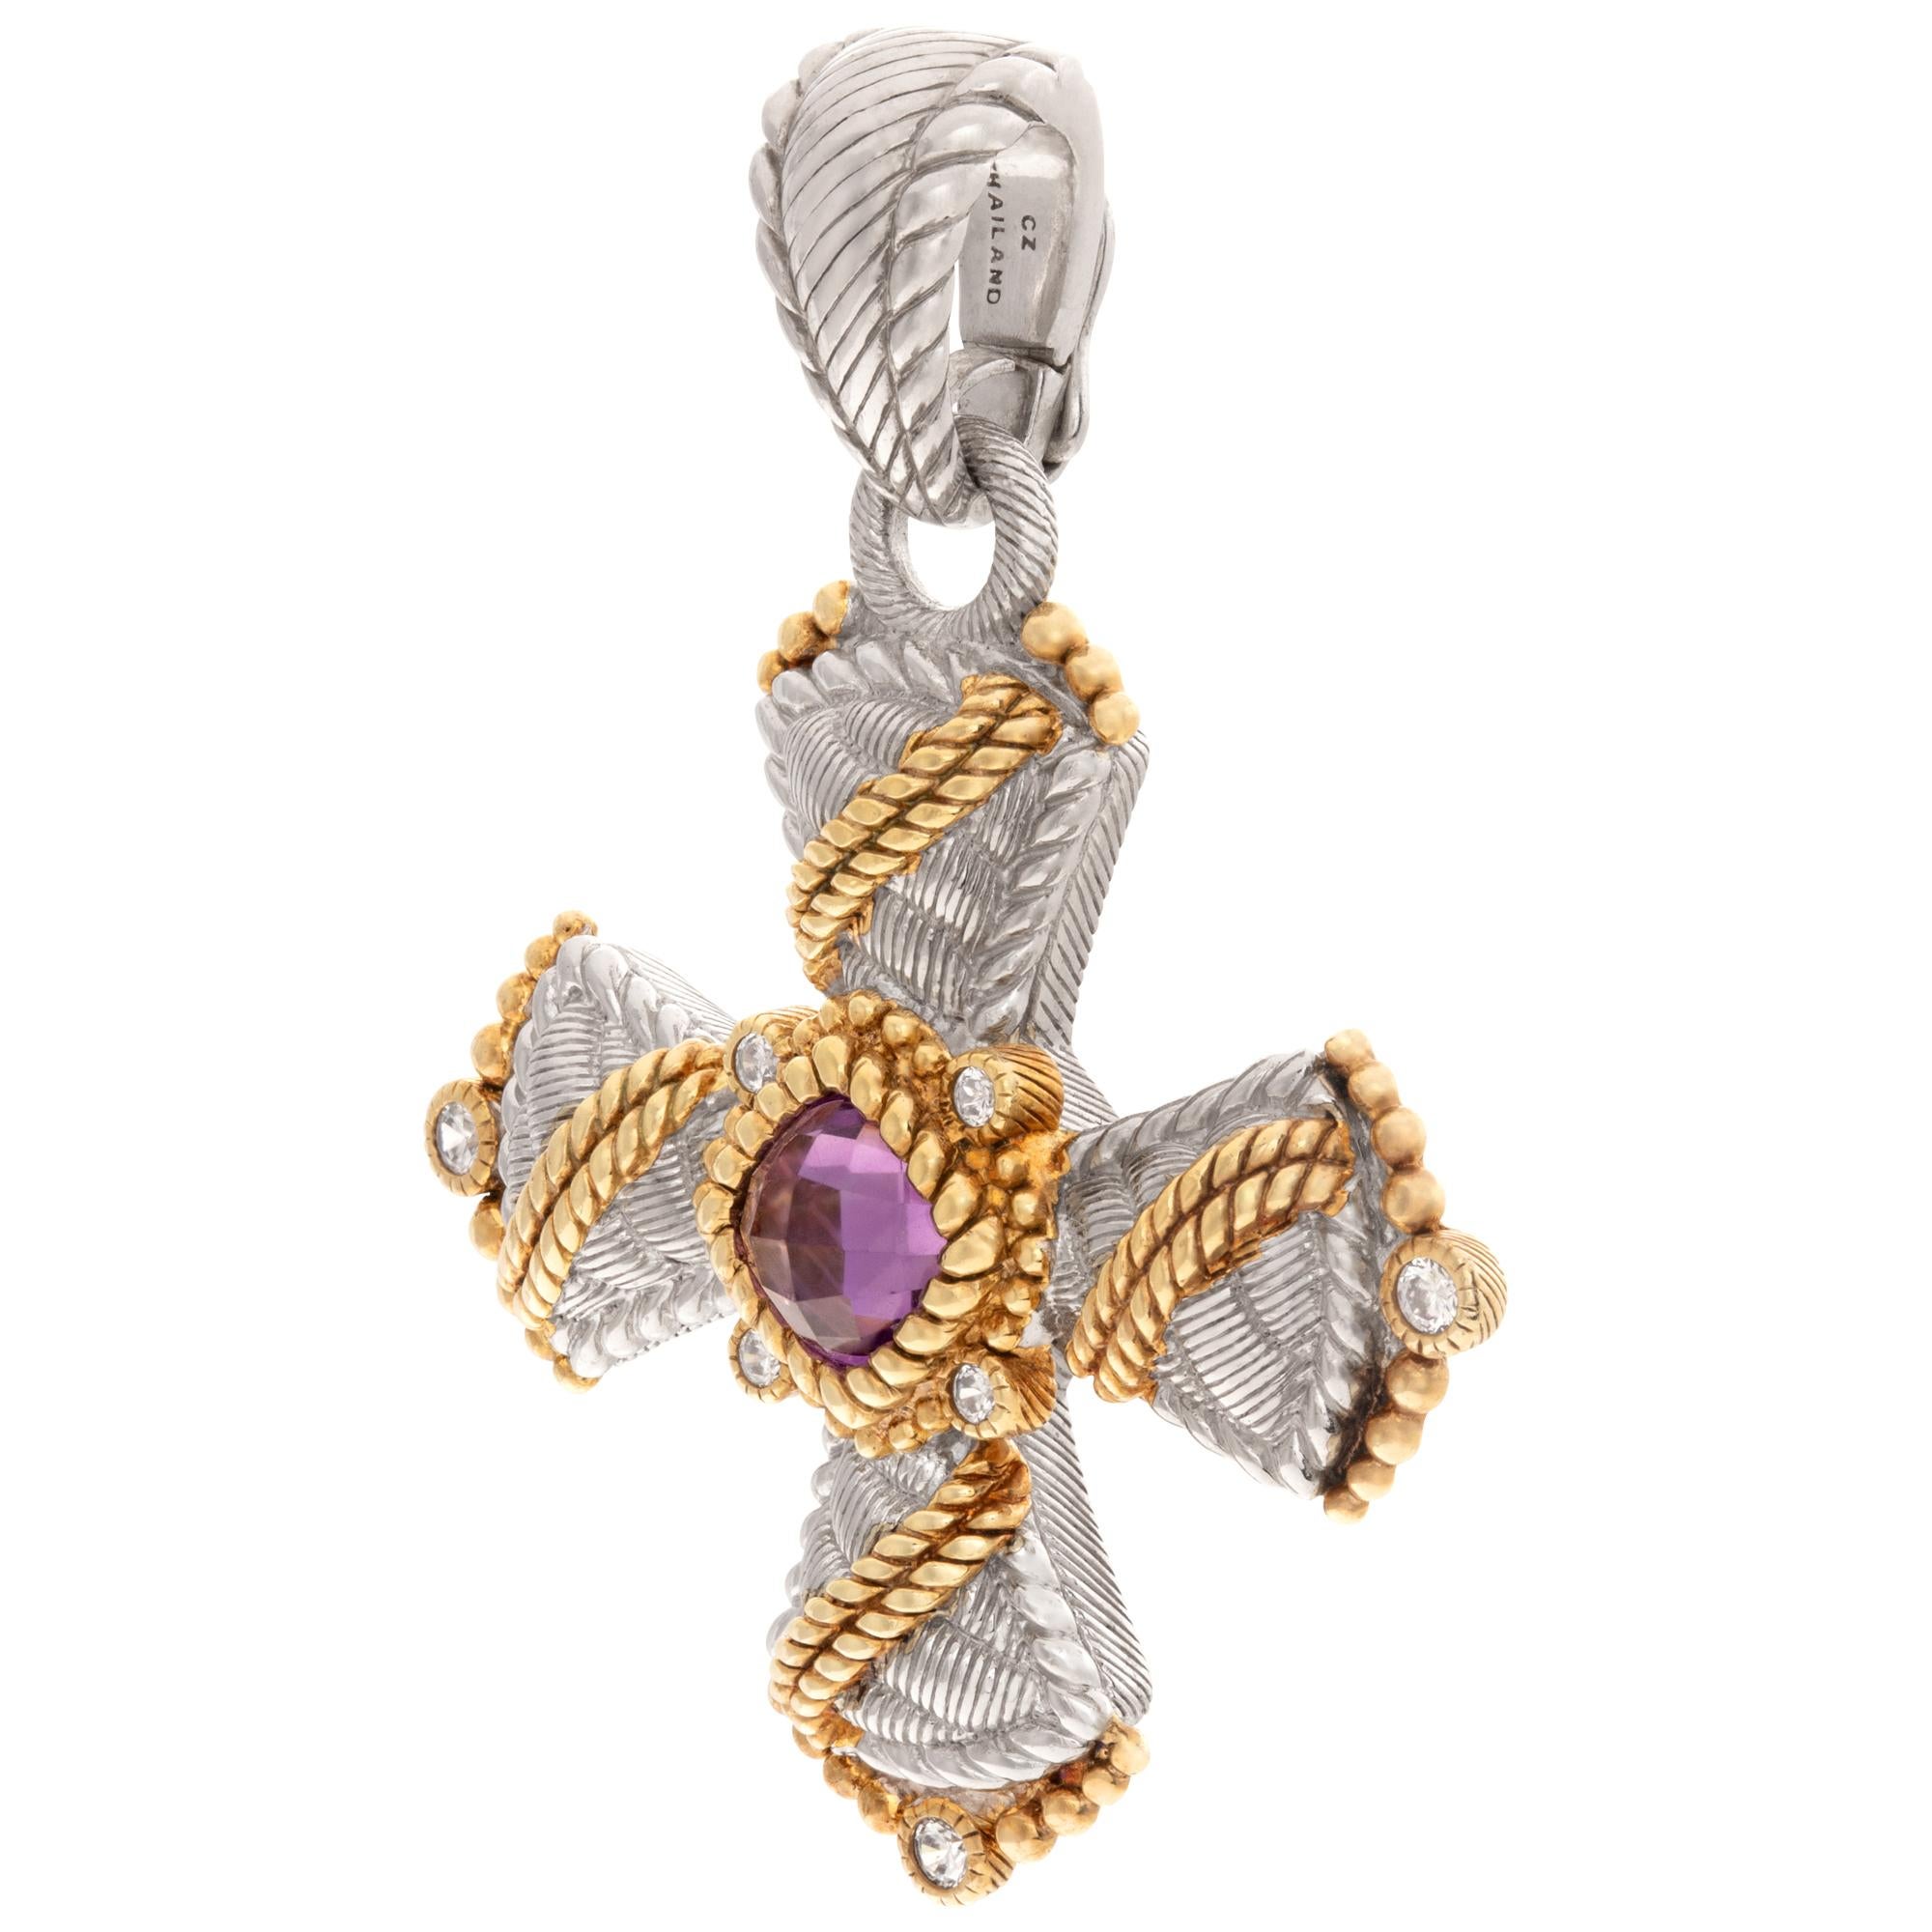 Judith Ripka cross pendant in 2 tone with faceted amethyst and accent cz white stones in sterling silver. Hanging length 48 mm x 33 mm.
